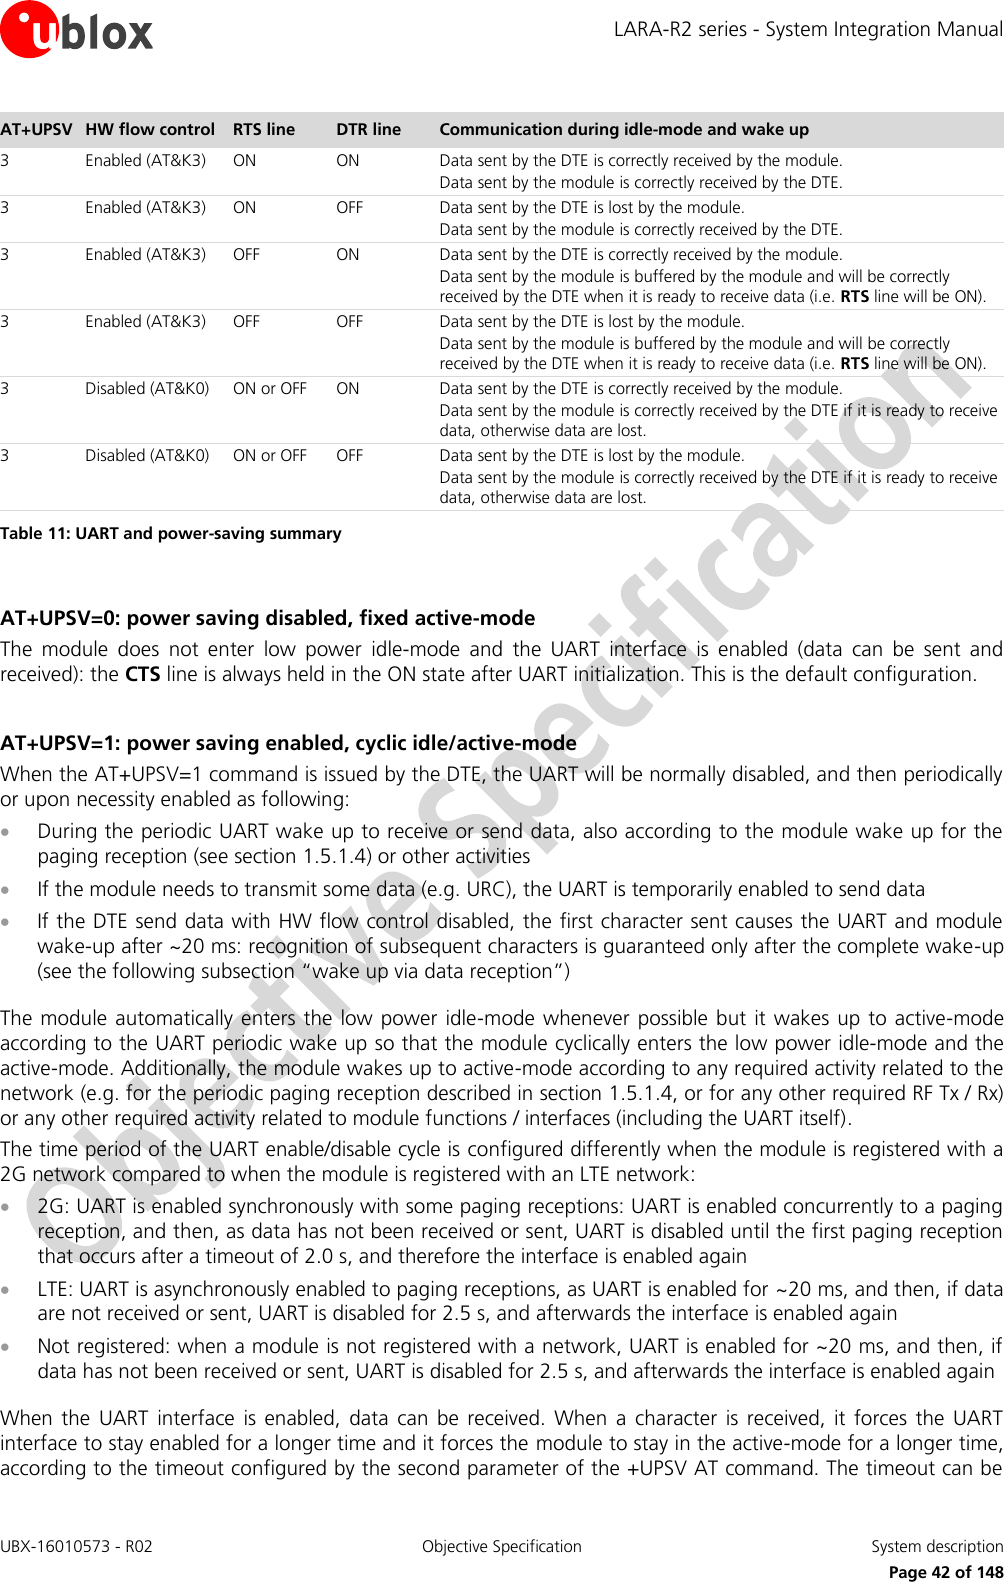 LARA-R2 series - System Integration Manual UBX-16010573 - R02  Objective Specification  System description     Page 42 of 148 AT+UPSV HW flow control RTS line DTR line Communication during idle-mode and wake up  3 Enabled (AT&amp;K3) ON ON Data sent by the DTE is correctly received by the module. Data sent by the module is correctly received by the DTE. 3 Enabled (AT&amp;K3) ON OFF Data sent by the DTE is lost by the module. Data sent by the module is correctly received by the DTE. 3 Enabled (AT&amp;K3) OFF ON Data sent by the DTE is correctly received by the module. Data sent by the module is buffered by the module and will be correctly received by the DTE when it is ready to receive data (i.e. RTS line will be ON). 3 Enabled (AT&amp;K3) OFF OFF Data sent by the DTE is lost by the module. Data sent by the module is buffered by the module and will be correctly received by the DTE when it is ready to receive data (i.e. RTS line will be ON). 3 Disabled (AT&amp;K0) ON or OFF ON Data sent by the DTE is correctly received by the module. Data sent by the module is correctly received by the DTE if it is ready to receive data, otherwise data are lost. 3 Disabled (AT&amp;K0) ON or OFF OFF Data sent by the DTE is lost by the module. Data sent by the module is correctly received by the DTE if it is ready to receive data, otherwise data are lost. Table 11: UART and power-saving summary  AT+UPSV=0: power saving disabled, fixed active-mode The  module  does  not  enter  low  power  idle-mode  and  the  UART  interface  is  enabled  (data  can  be  sent  and received): the CTS line is always held in the ON state after UART initialization. This is the default configuration.  AT+UPSV=1: power saving enabled, cyclic idle/active-mode When the AT+UPSV=1 command is issued by the DTE, the UART will be normally disabled, and then periodically or upon necessity enabled as following:   During the periodic UART wake up to receive or send data, also according to the module wake up for the paging reception (see section 1.5.1.4) or other activities  If the module needs to transmit some data (e.g. URC), the UART is temporarily enabled to send data   If the DTE send data with HW flow control disabled, the first character sent causes the UART and module wake-up after ~20 ms: recognition of subsequent characters is guaranteed only after the complete wake-up (see the following subsection “wake up via data reception”)  The module automatically enters  the low power idle-mode  whenever  possible but  it wakes  up  to  active-mode according to the UART periodic wake up so that the module cyclically enters the low power idle-mode and the active-mode. Additionally, the module wakes up to active-mode according to any required activity related to the network (e.g. for the periodic paging reception described in section 1.5.1.4, or for any other required RF Tx / Rx) or any other required activity related to module functions / interfaces (including the UART itself). The time period of the UART enable/disable cycle is configured differently when the module is registered with a 2G network compared to when the module is registered with an LTE network:  2G: UART is enabled synchronously with some paging receptions: UART is enabled concurrently to a paging reception, and then, as data has not been received or sent, UART is disabled until the first paging reception that occurs after a timeout of 2.0 s, and therefore the interface is enabled again  LTE: UART is asynchronously enabled to paging receptions, as UART is enabled for ~20 ms, and then, if data are not received or sent, UART is disabled for 2.5 s, and afterwards the interface is enabled again  Not registered: when a module is not registered with a network, UART is enabled for ~20 ms, and then, if data has not been received or sent, UART is disabled for 2.5 s, and afterwards the interface is enabled again  When  the  UART  interface  is  enabled,  data  can  be  received.  When  a  character  is  received,  it  forces  the  UART interface to stay enabled for a longer time and it forces the module to stay in the active-mode for a longer time, according to the timeout configured by the second parameter of the +UPSV AT command. The timeout can be 